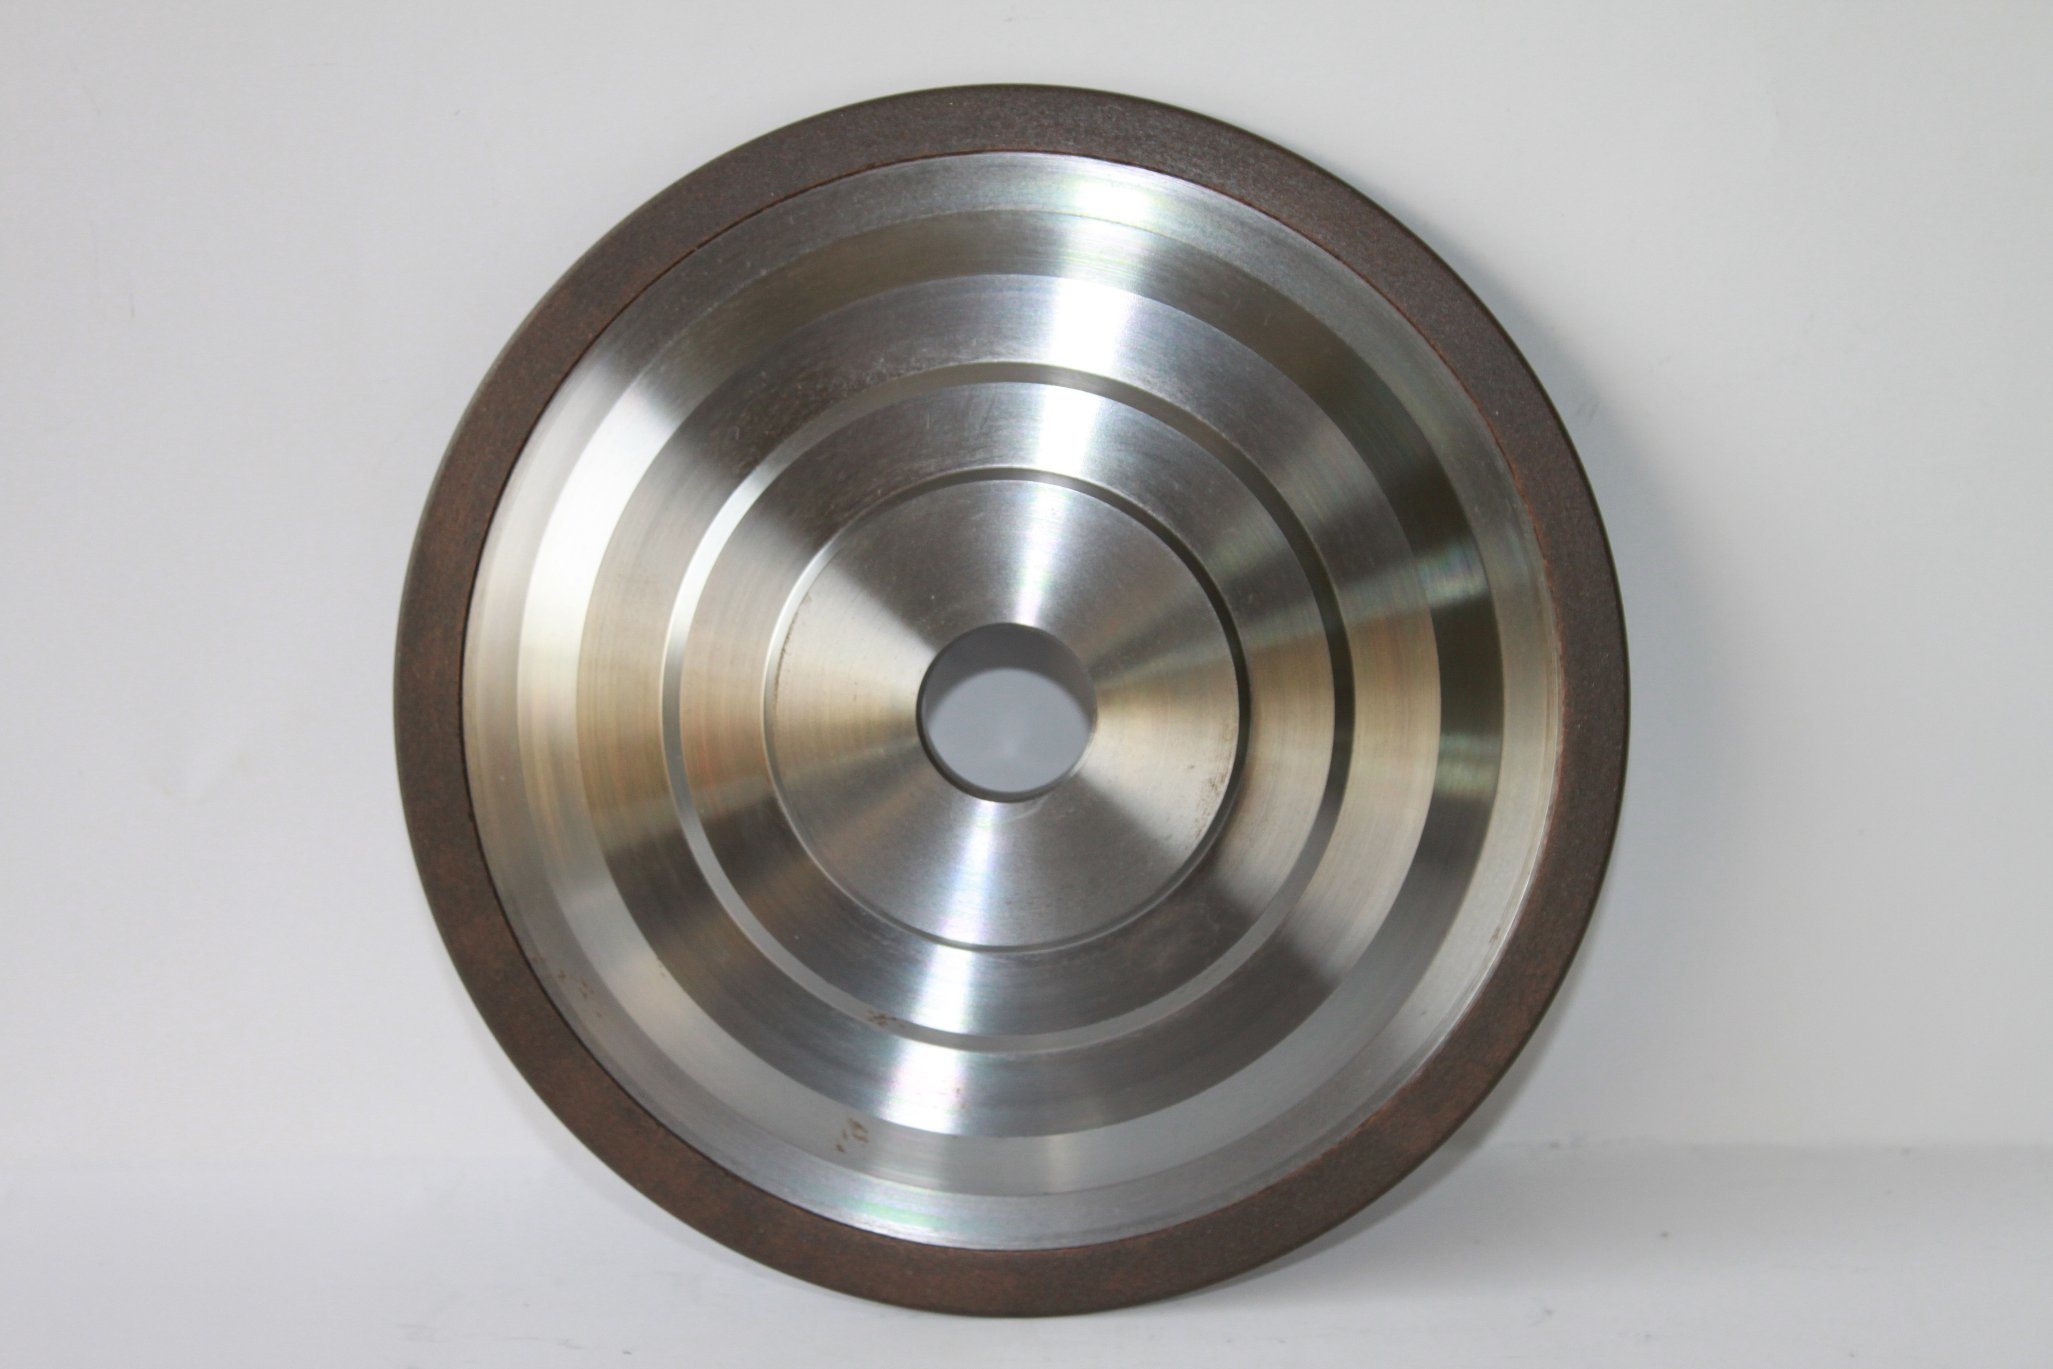 Cold Saw Wheel for Tooth-From Grinding